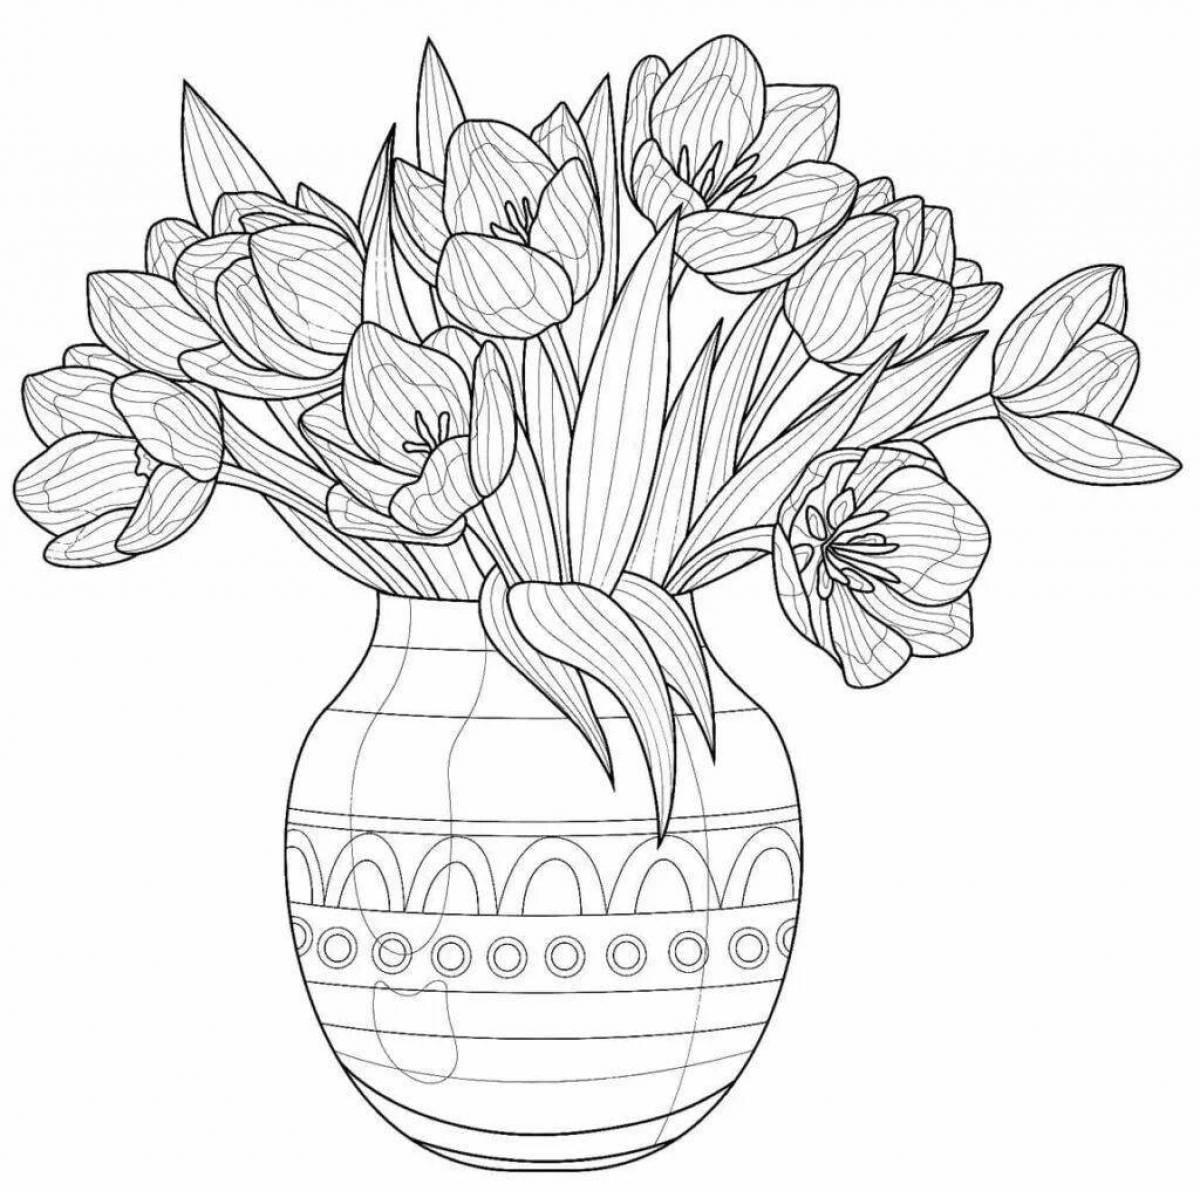 A magnificent bouquet of flowers in a vase coloring book